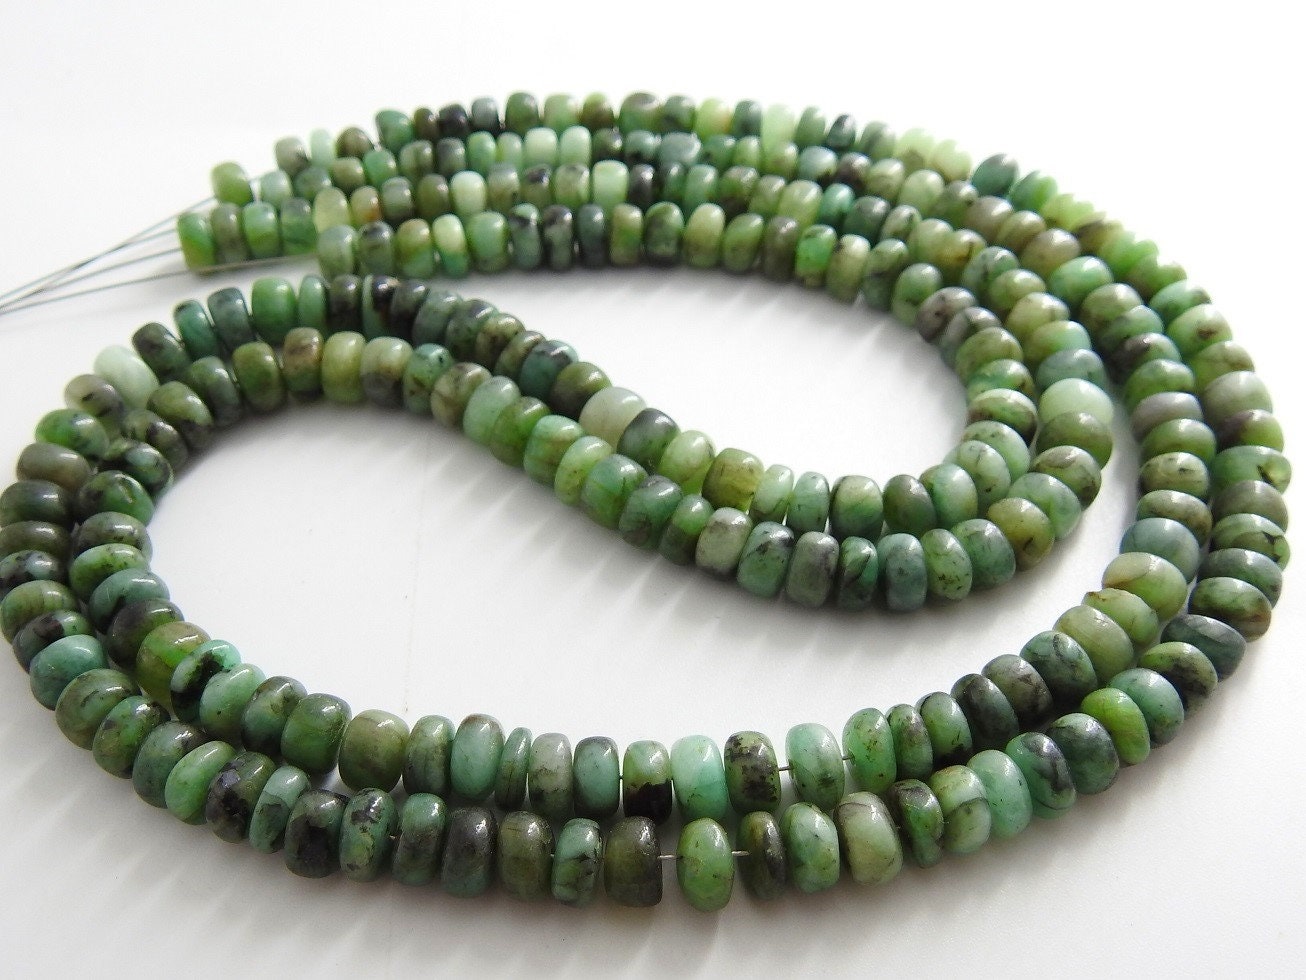 Emerald Smooth Roundel Bead,Shaded,Loose Stone,Handmade,Wholesale Price,New Arrival,18Inch Strand 100%Natural PME(B12) | Save 33% - Rajasthan Living 16